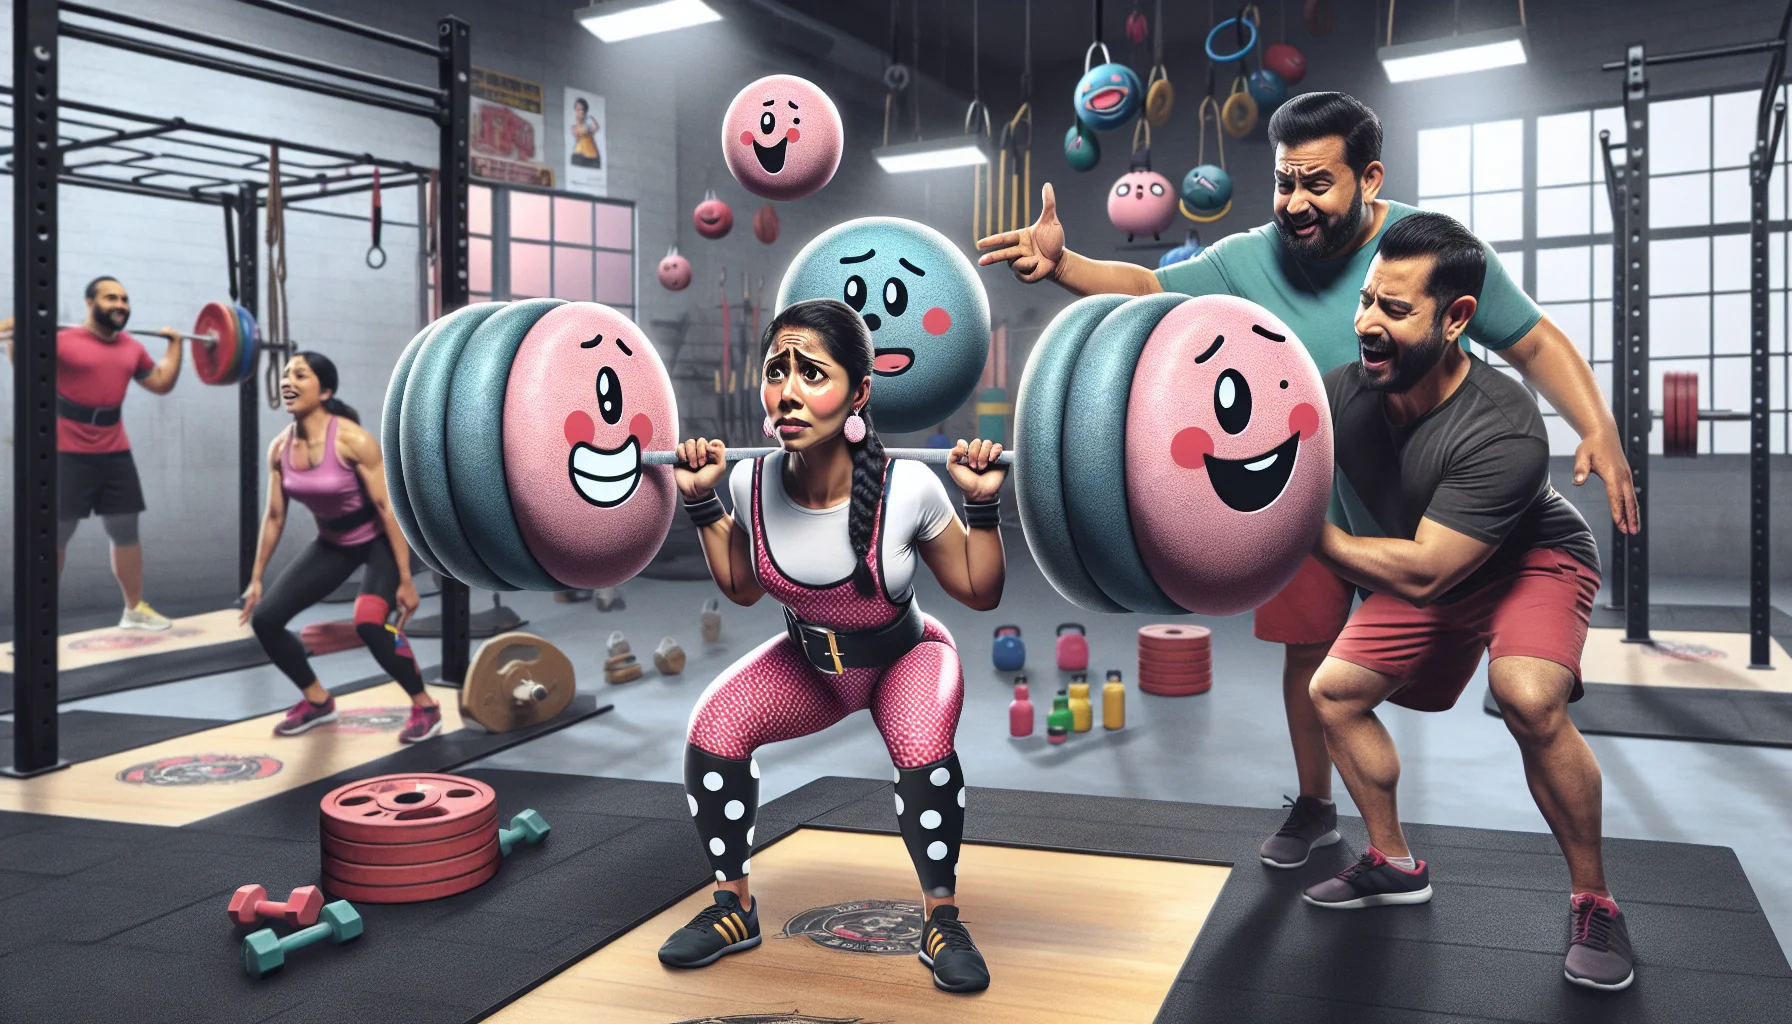 Imagine a scenario where caricatured, stylized weights, shaped like large polka dots, are being humorously used in a powerlifting session. The weights have faces which reflect their own emotions of surprise and amusement. On one side, a strong South Asian female powerlifter is lifting them with determination, her facial expression fraught with effort but also with a thin smile. On the other side, a Hispanic male trainer is trying to suppress laughter, pointing at the weights and making a 'thumbs up' sign to motivate her. The background is filled with gym equipment and other powerlifters of various descents and genders, carrying out their exercises while stifling laughter. Remember, the aim is to inspire and make exercising look fun.